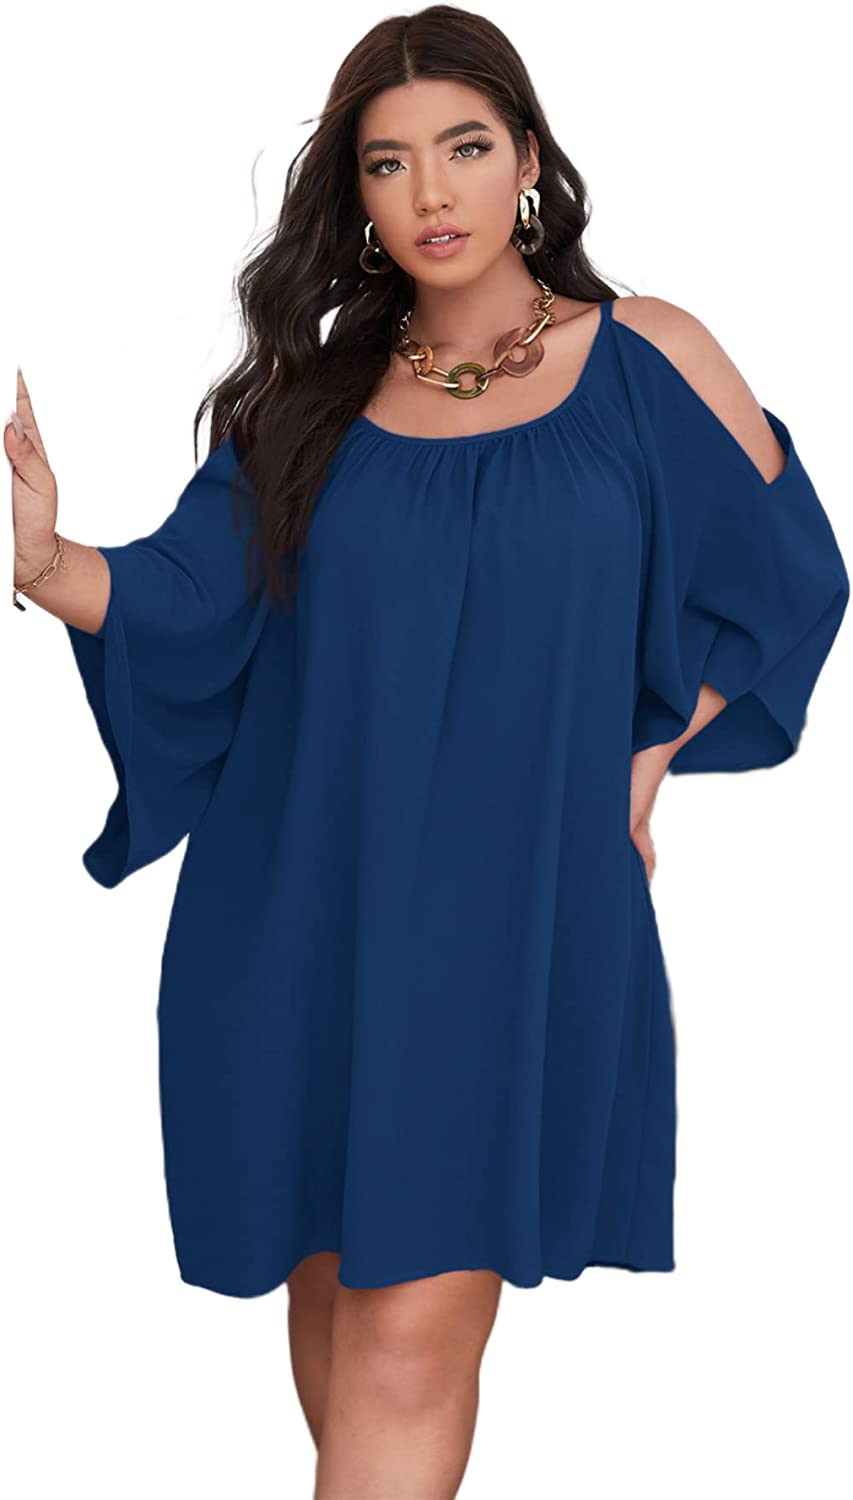 SOLY HUX Women Plus Size Casual Summer Dress Cold Shoulder 3/4